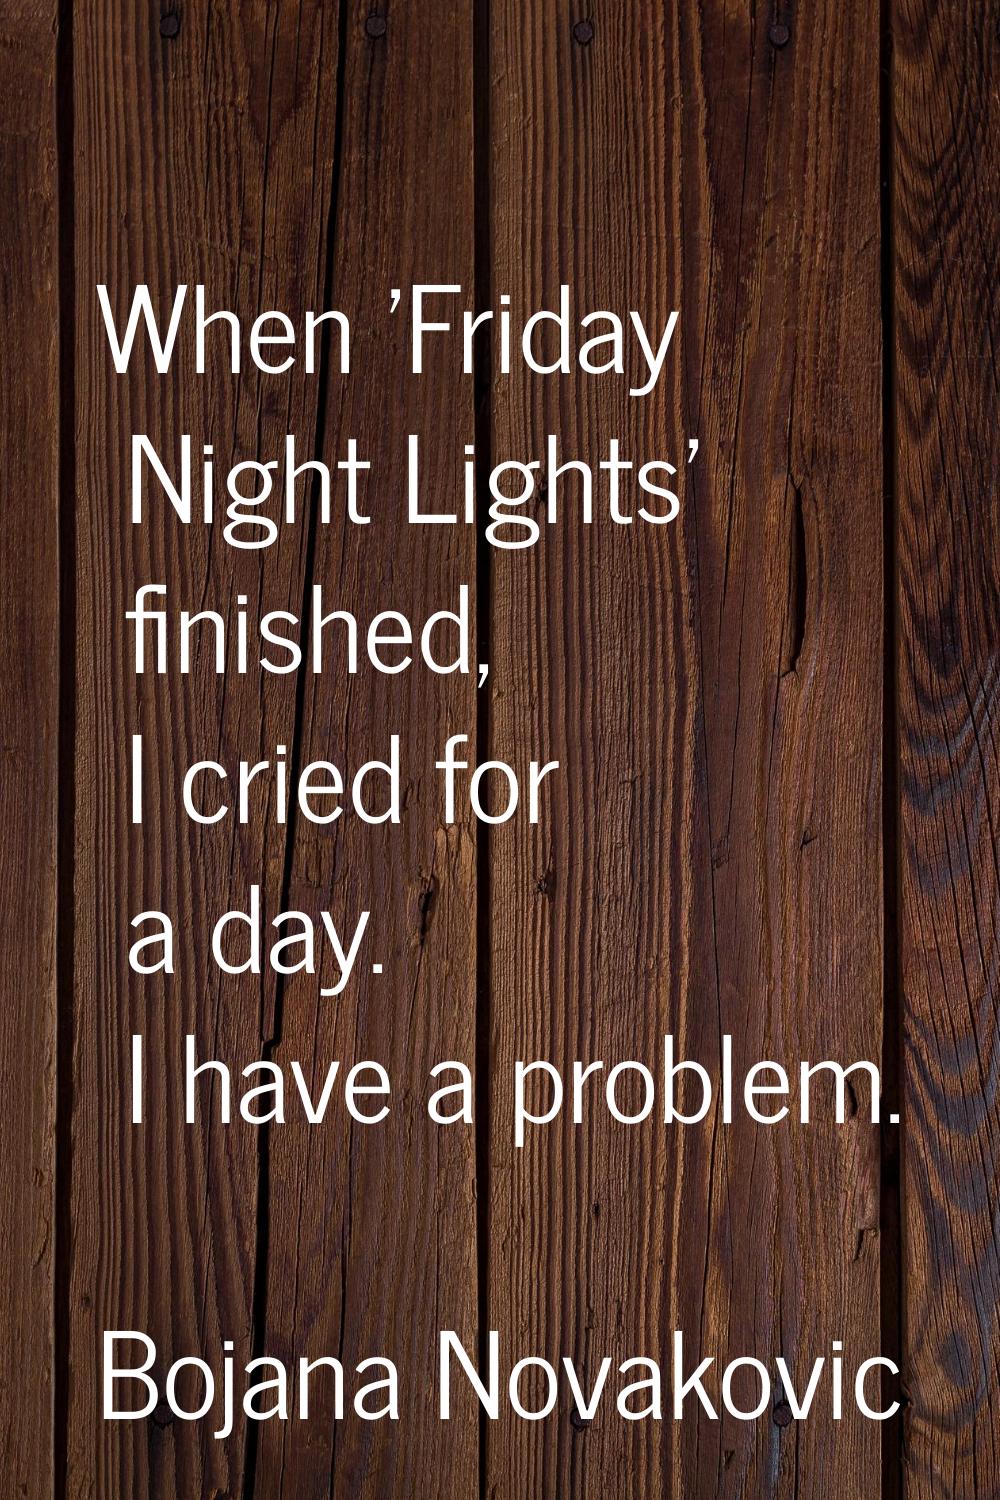 When 'Friday Night Lights' finished, I cried for a day. I have a problem.